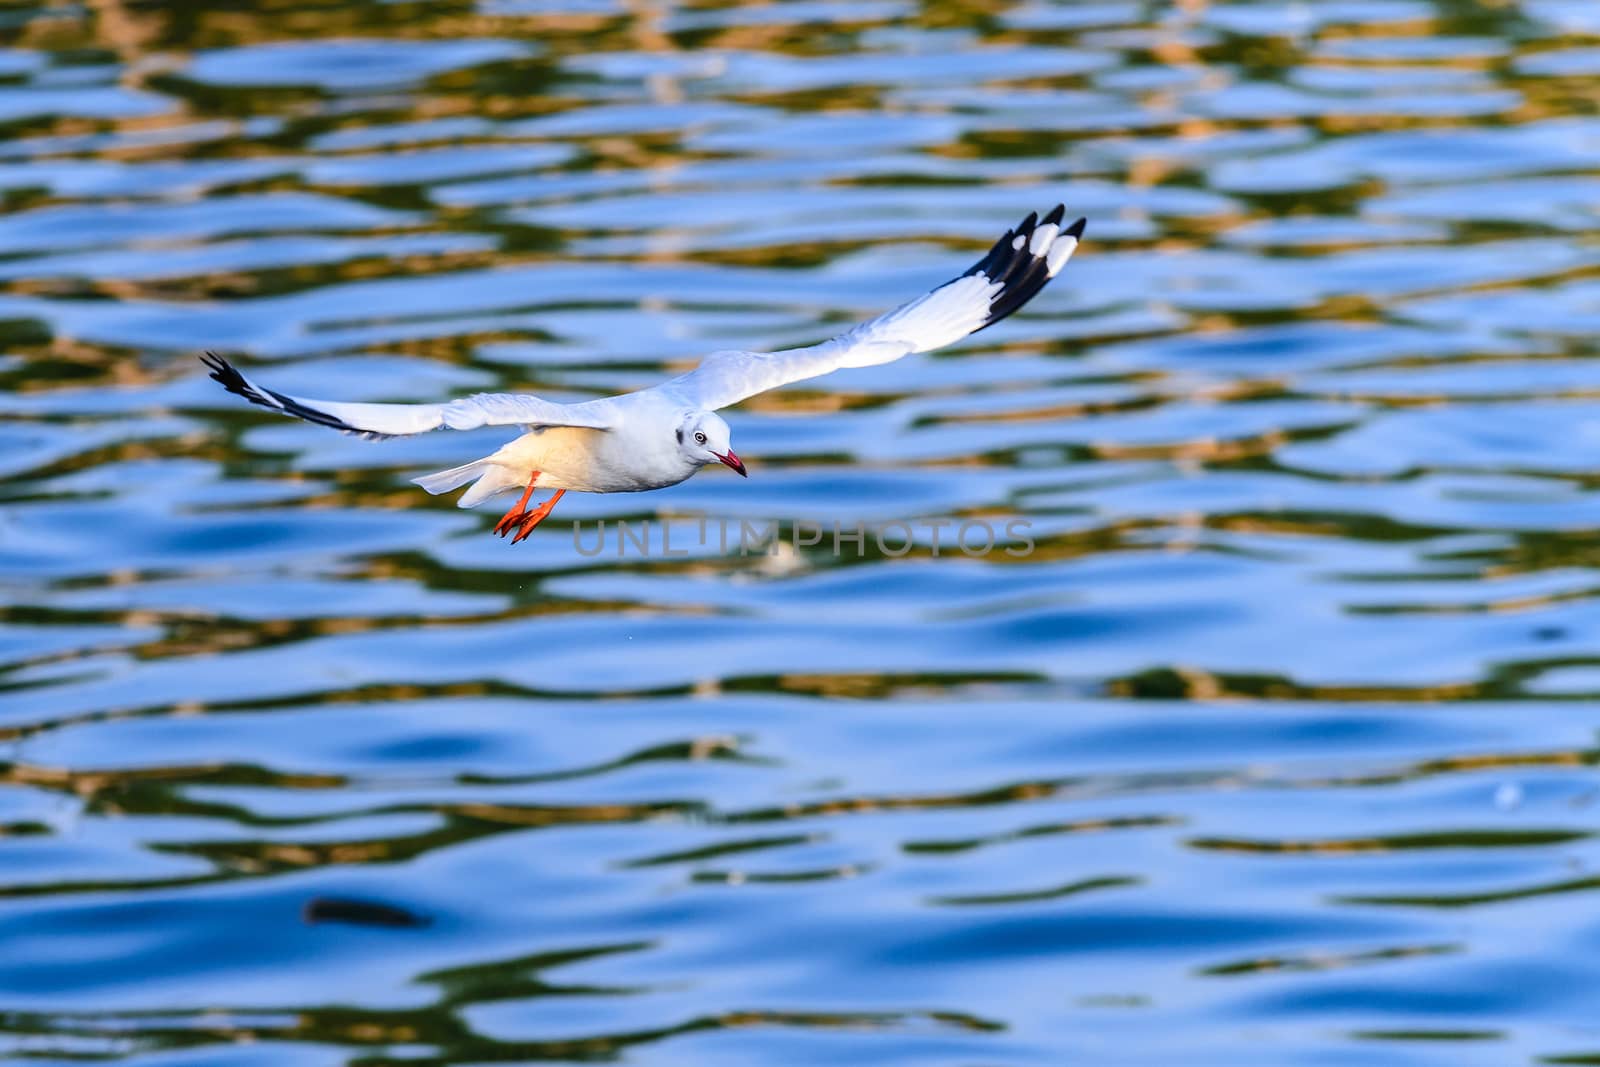 flying seagulls in action at Bangpoo Thailand by jakgree